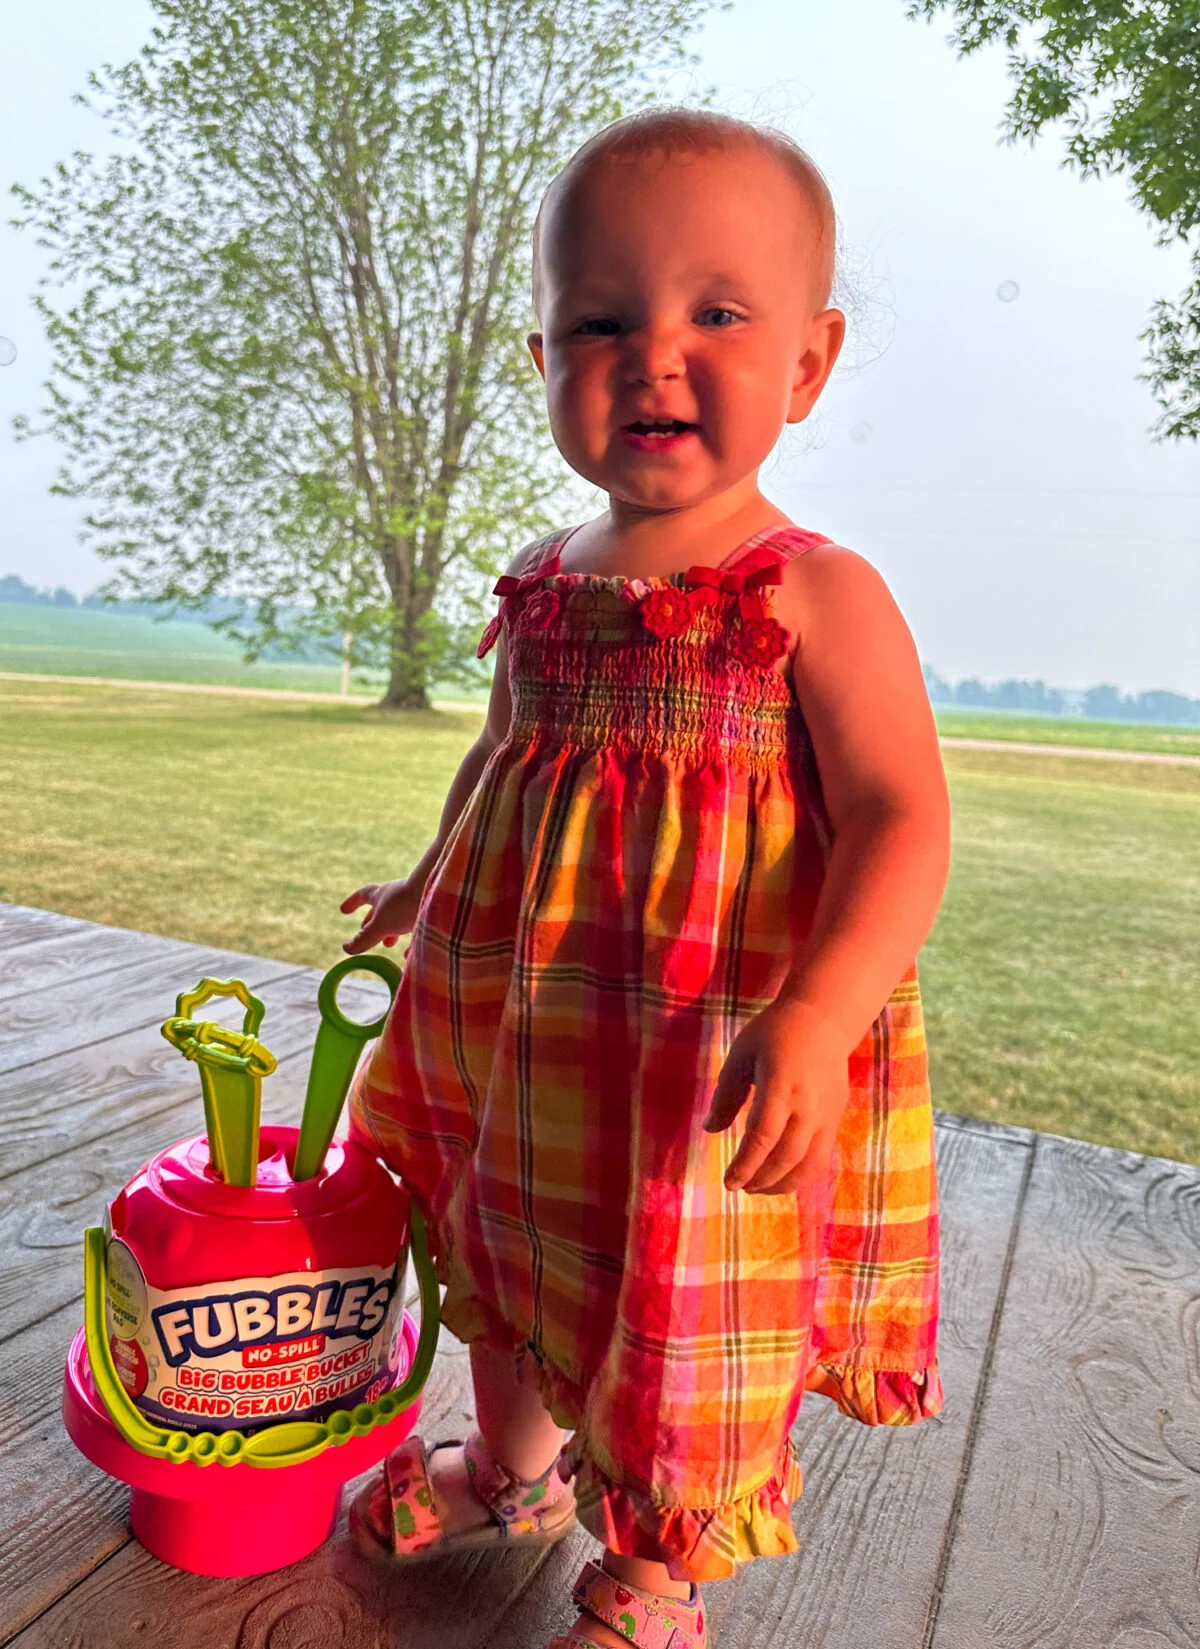 baby girl with bubbles - The Best Bubbles Toys: Fubbles Review + Giveaway